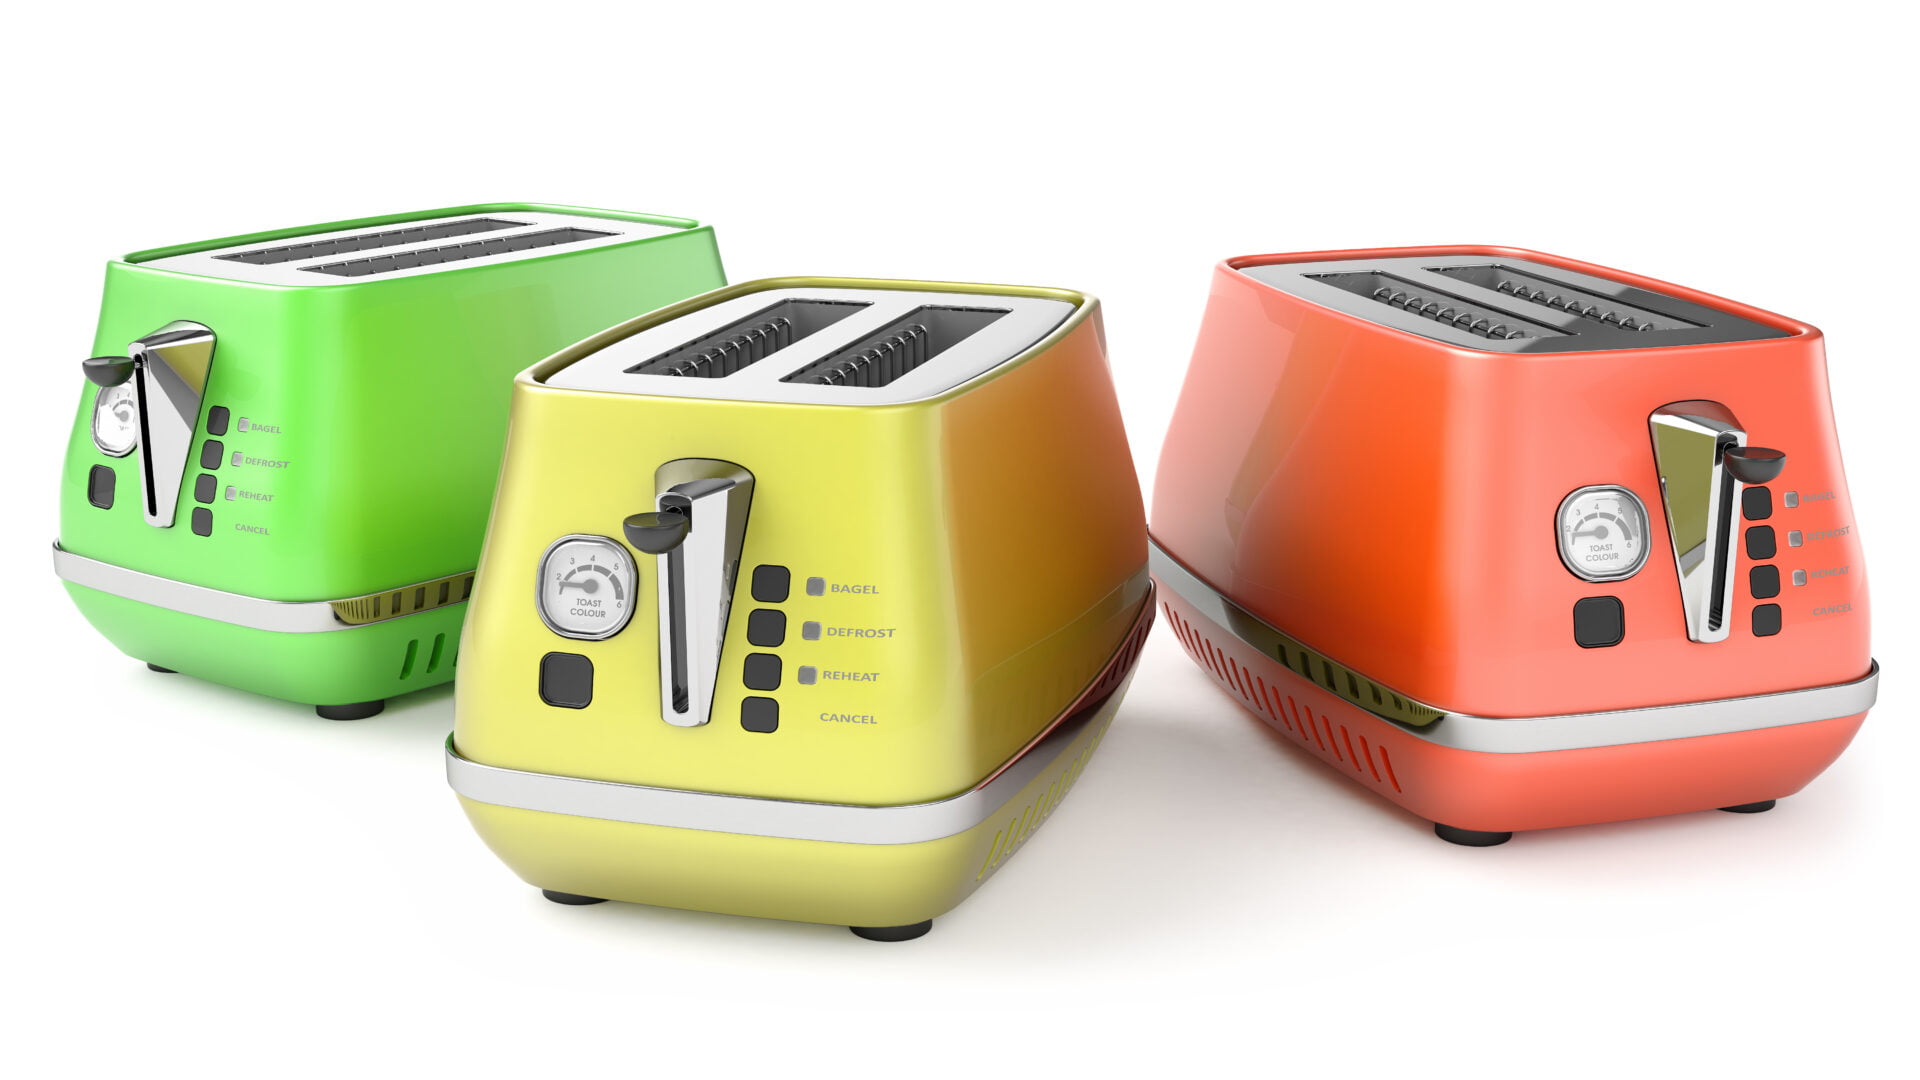 toasters with different bright colors